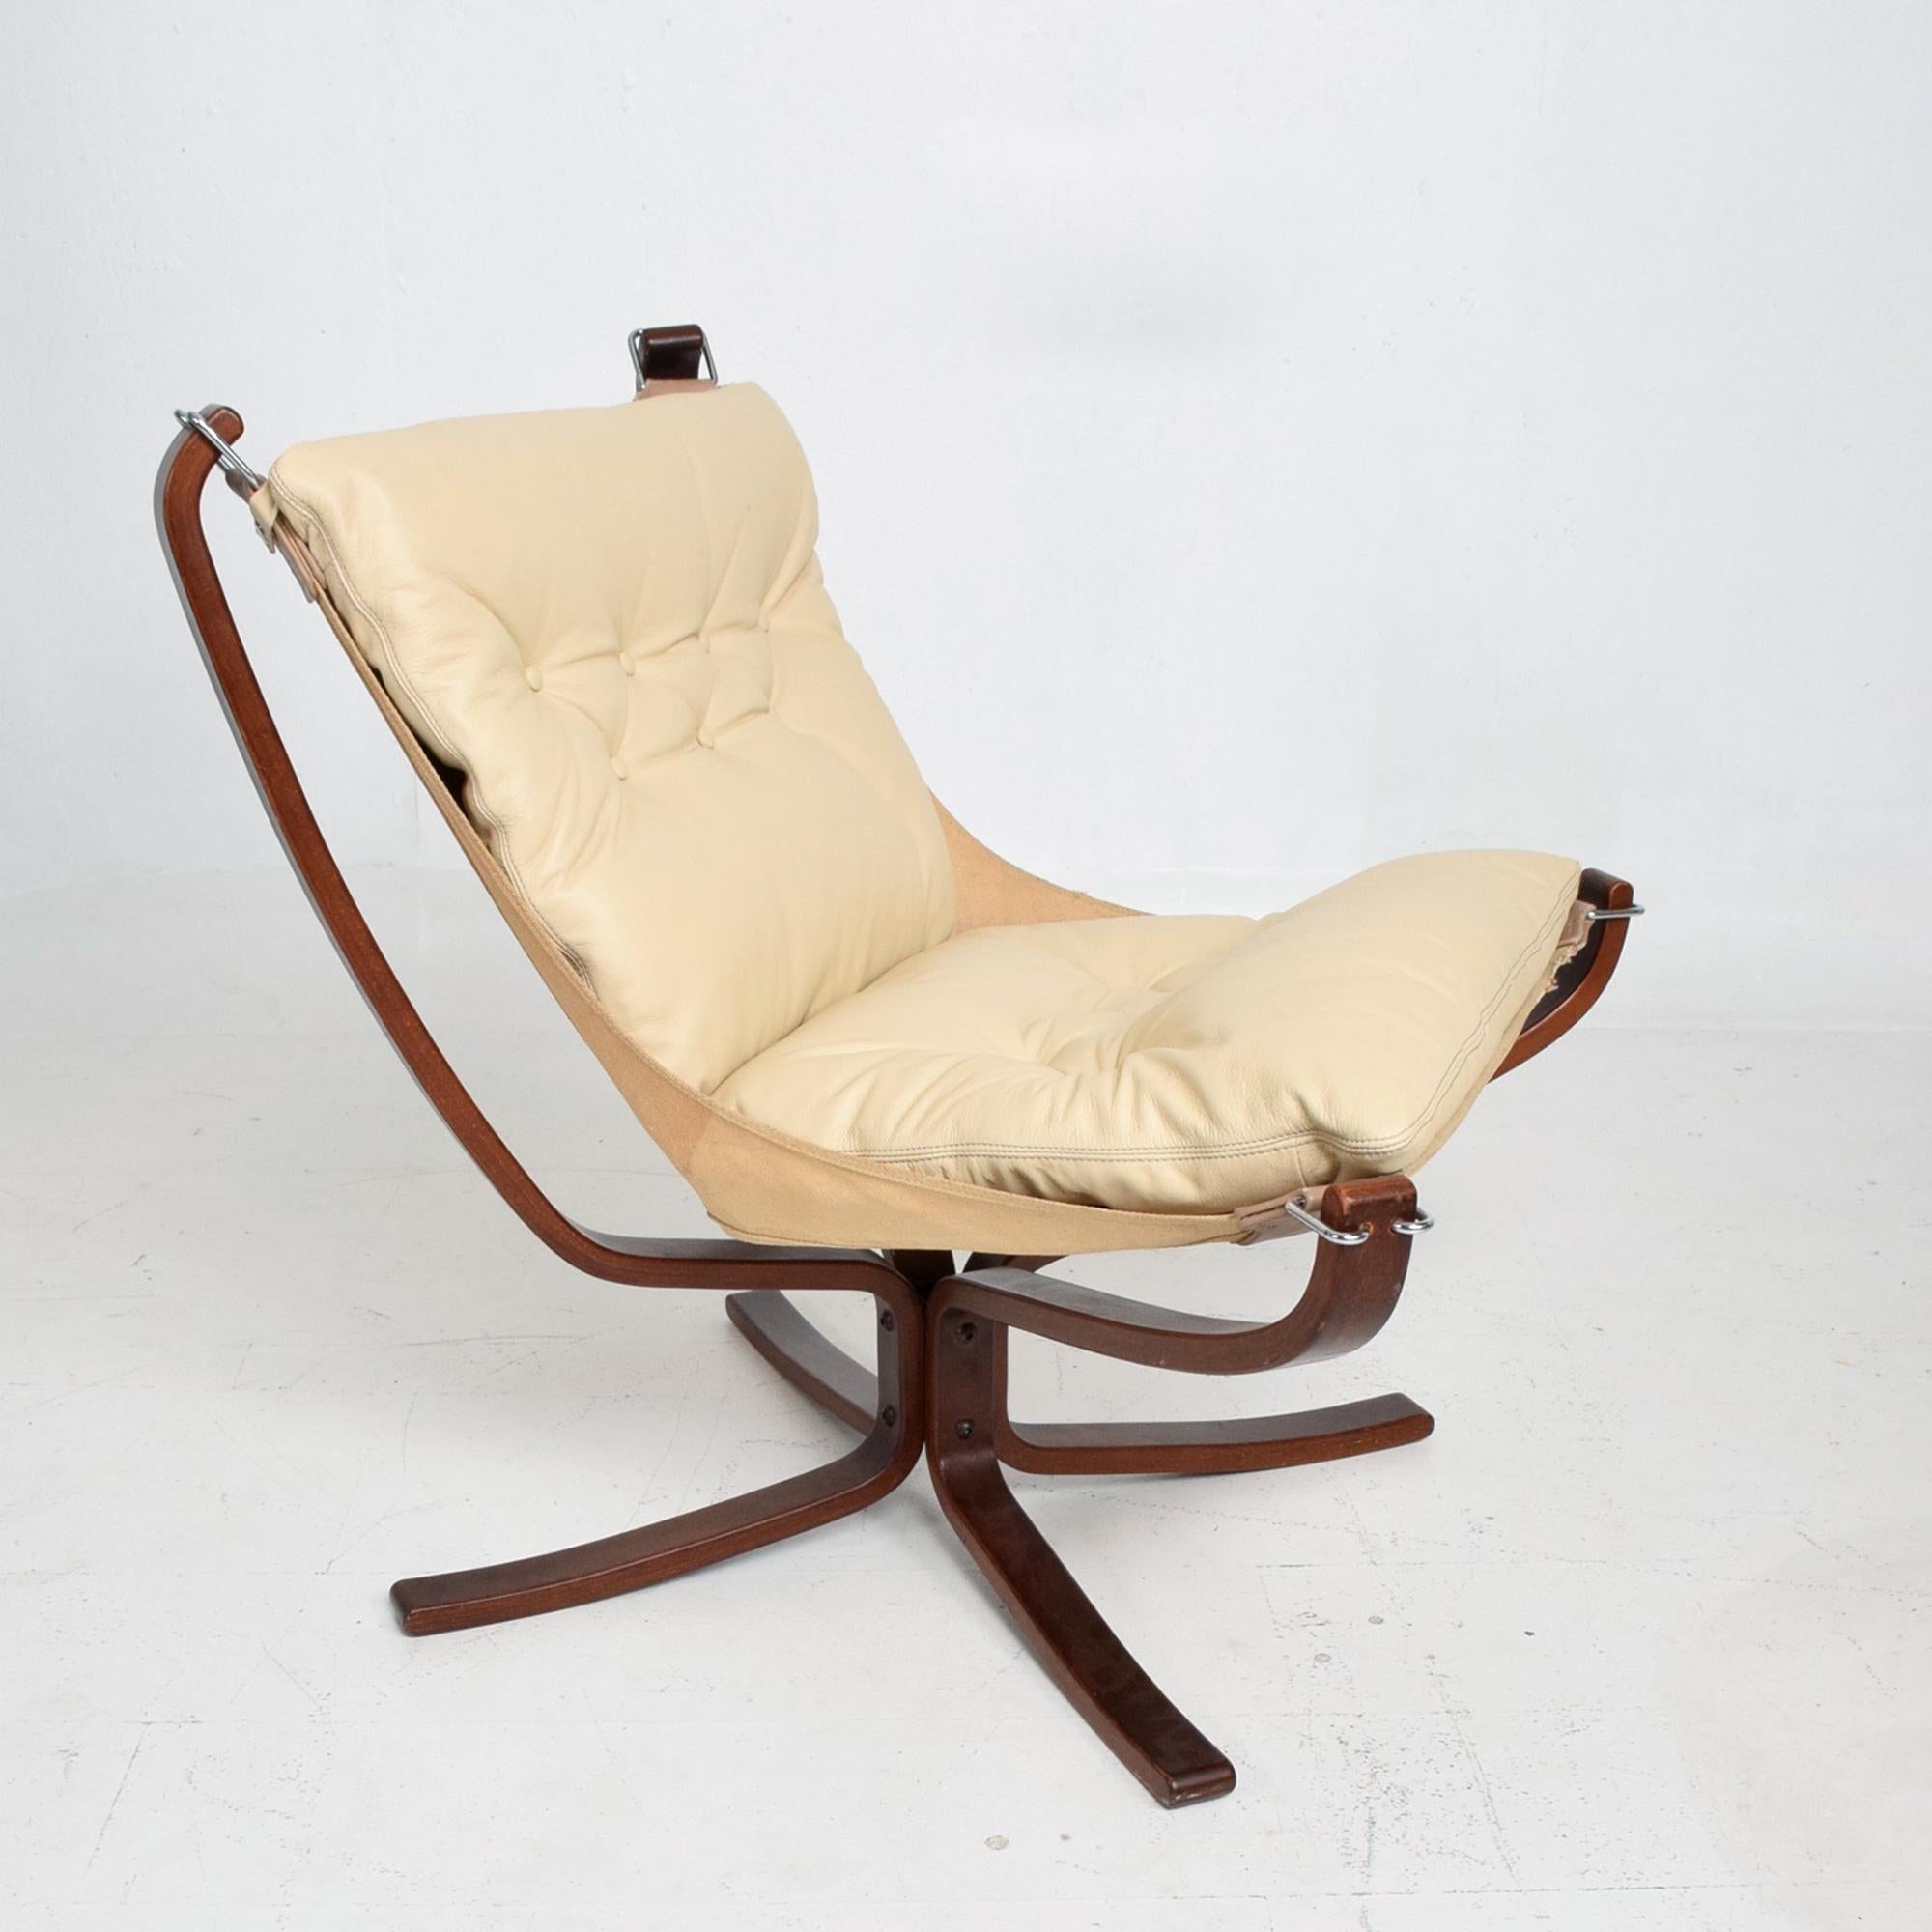 Classic Scandinavian Modern in a Mid-Century Modern falcon lounge chair by Sigurd Ressell for Vatne Møbler 1970 design, Norway.

New cushion in ivory leather. 

Measures: 33